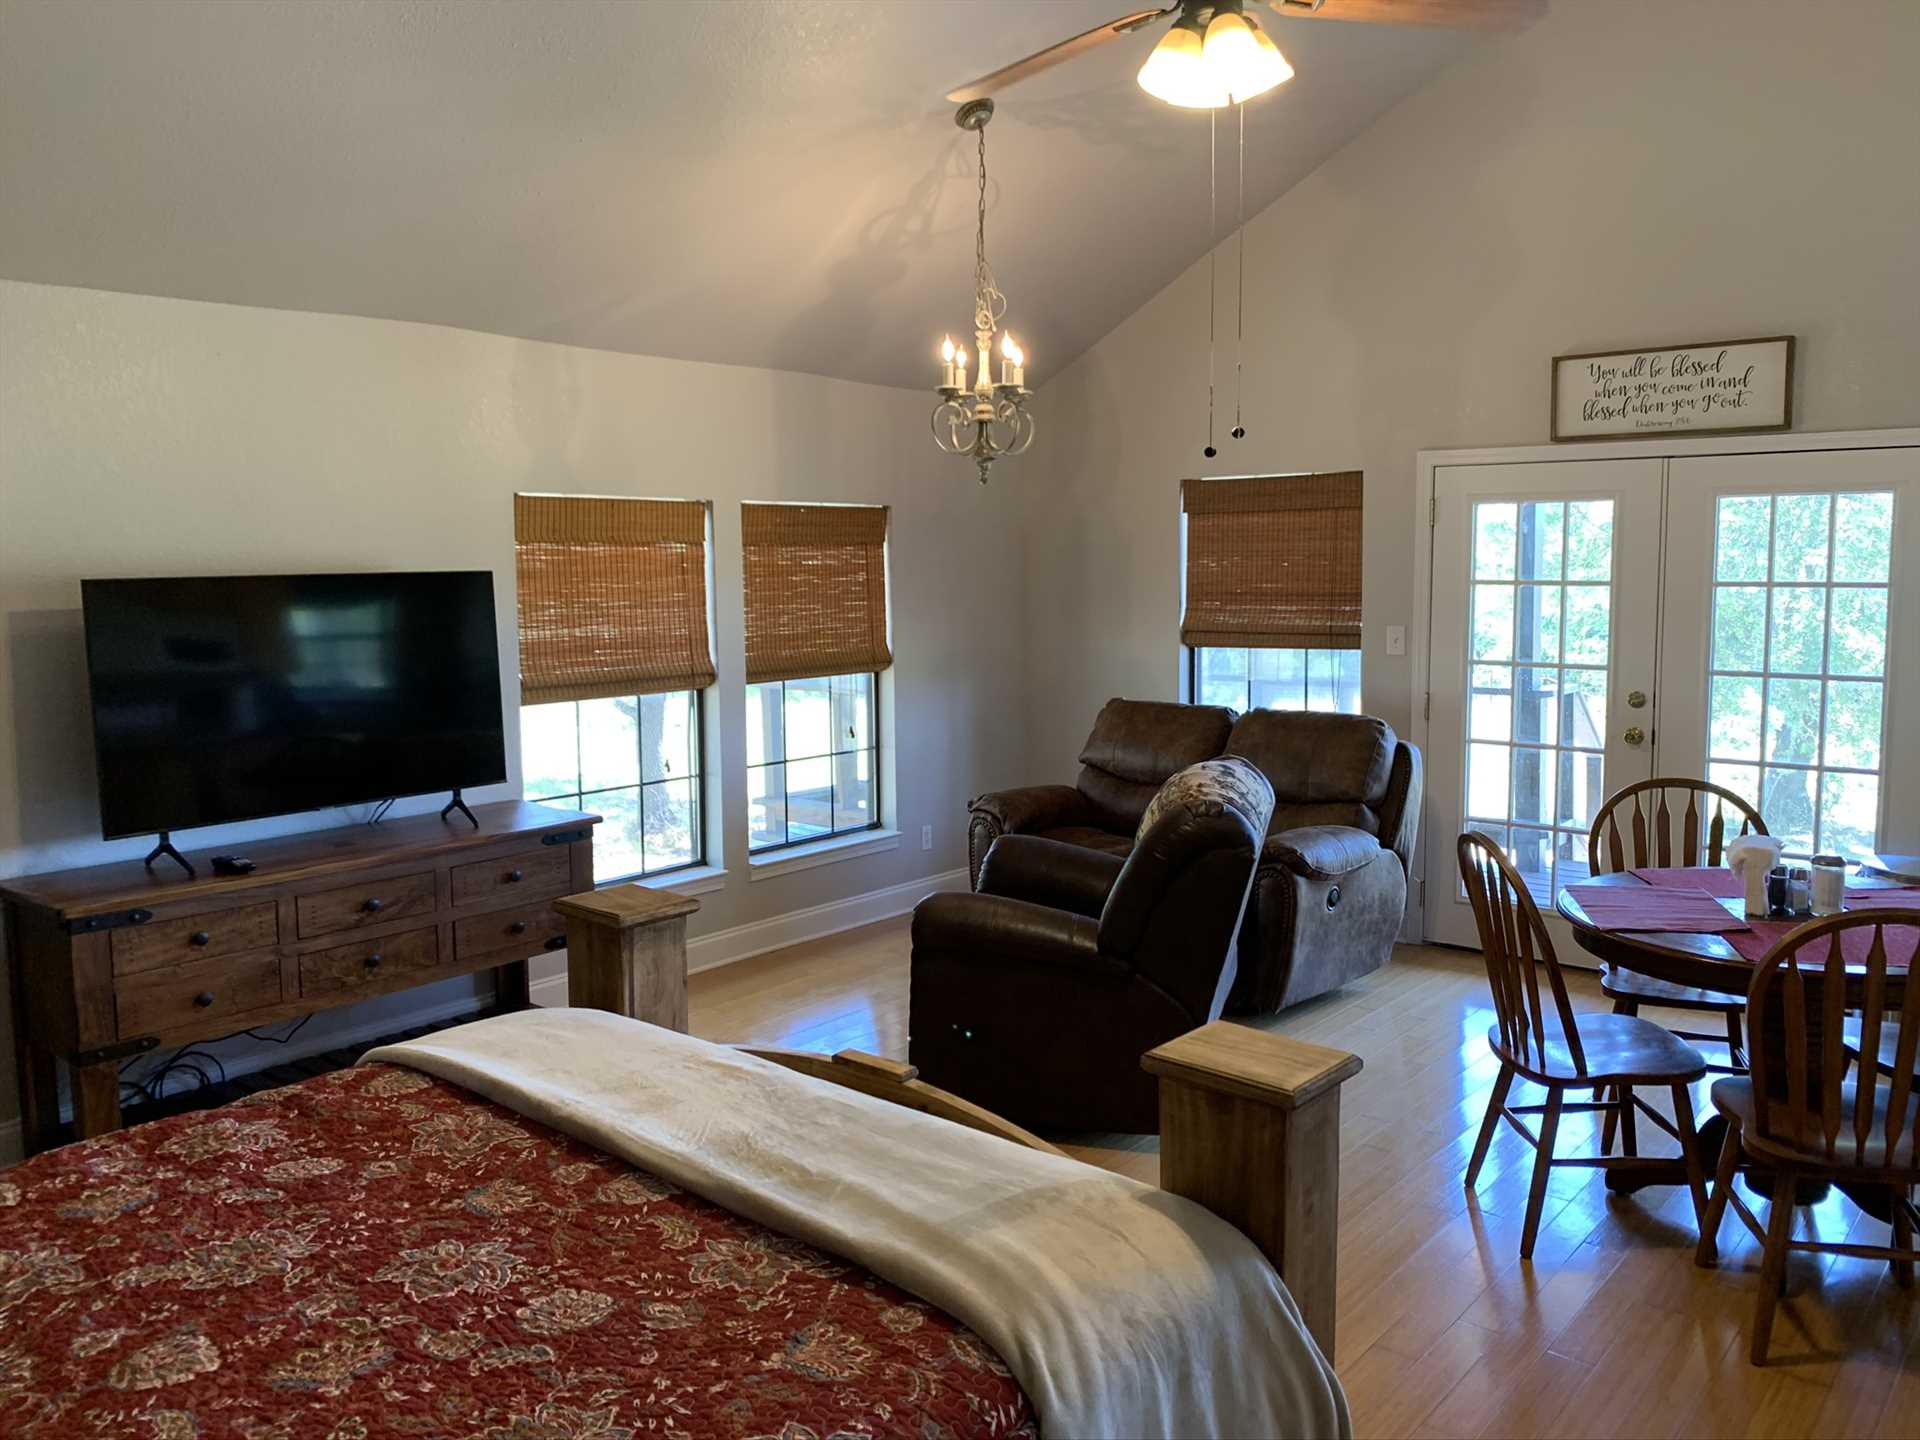                                                 The open-floor plan of the cabin allows the French doors and windows to fill the space with warm natural light.